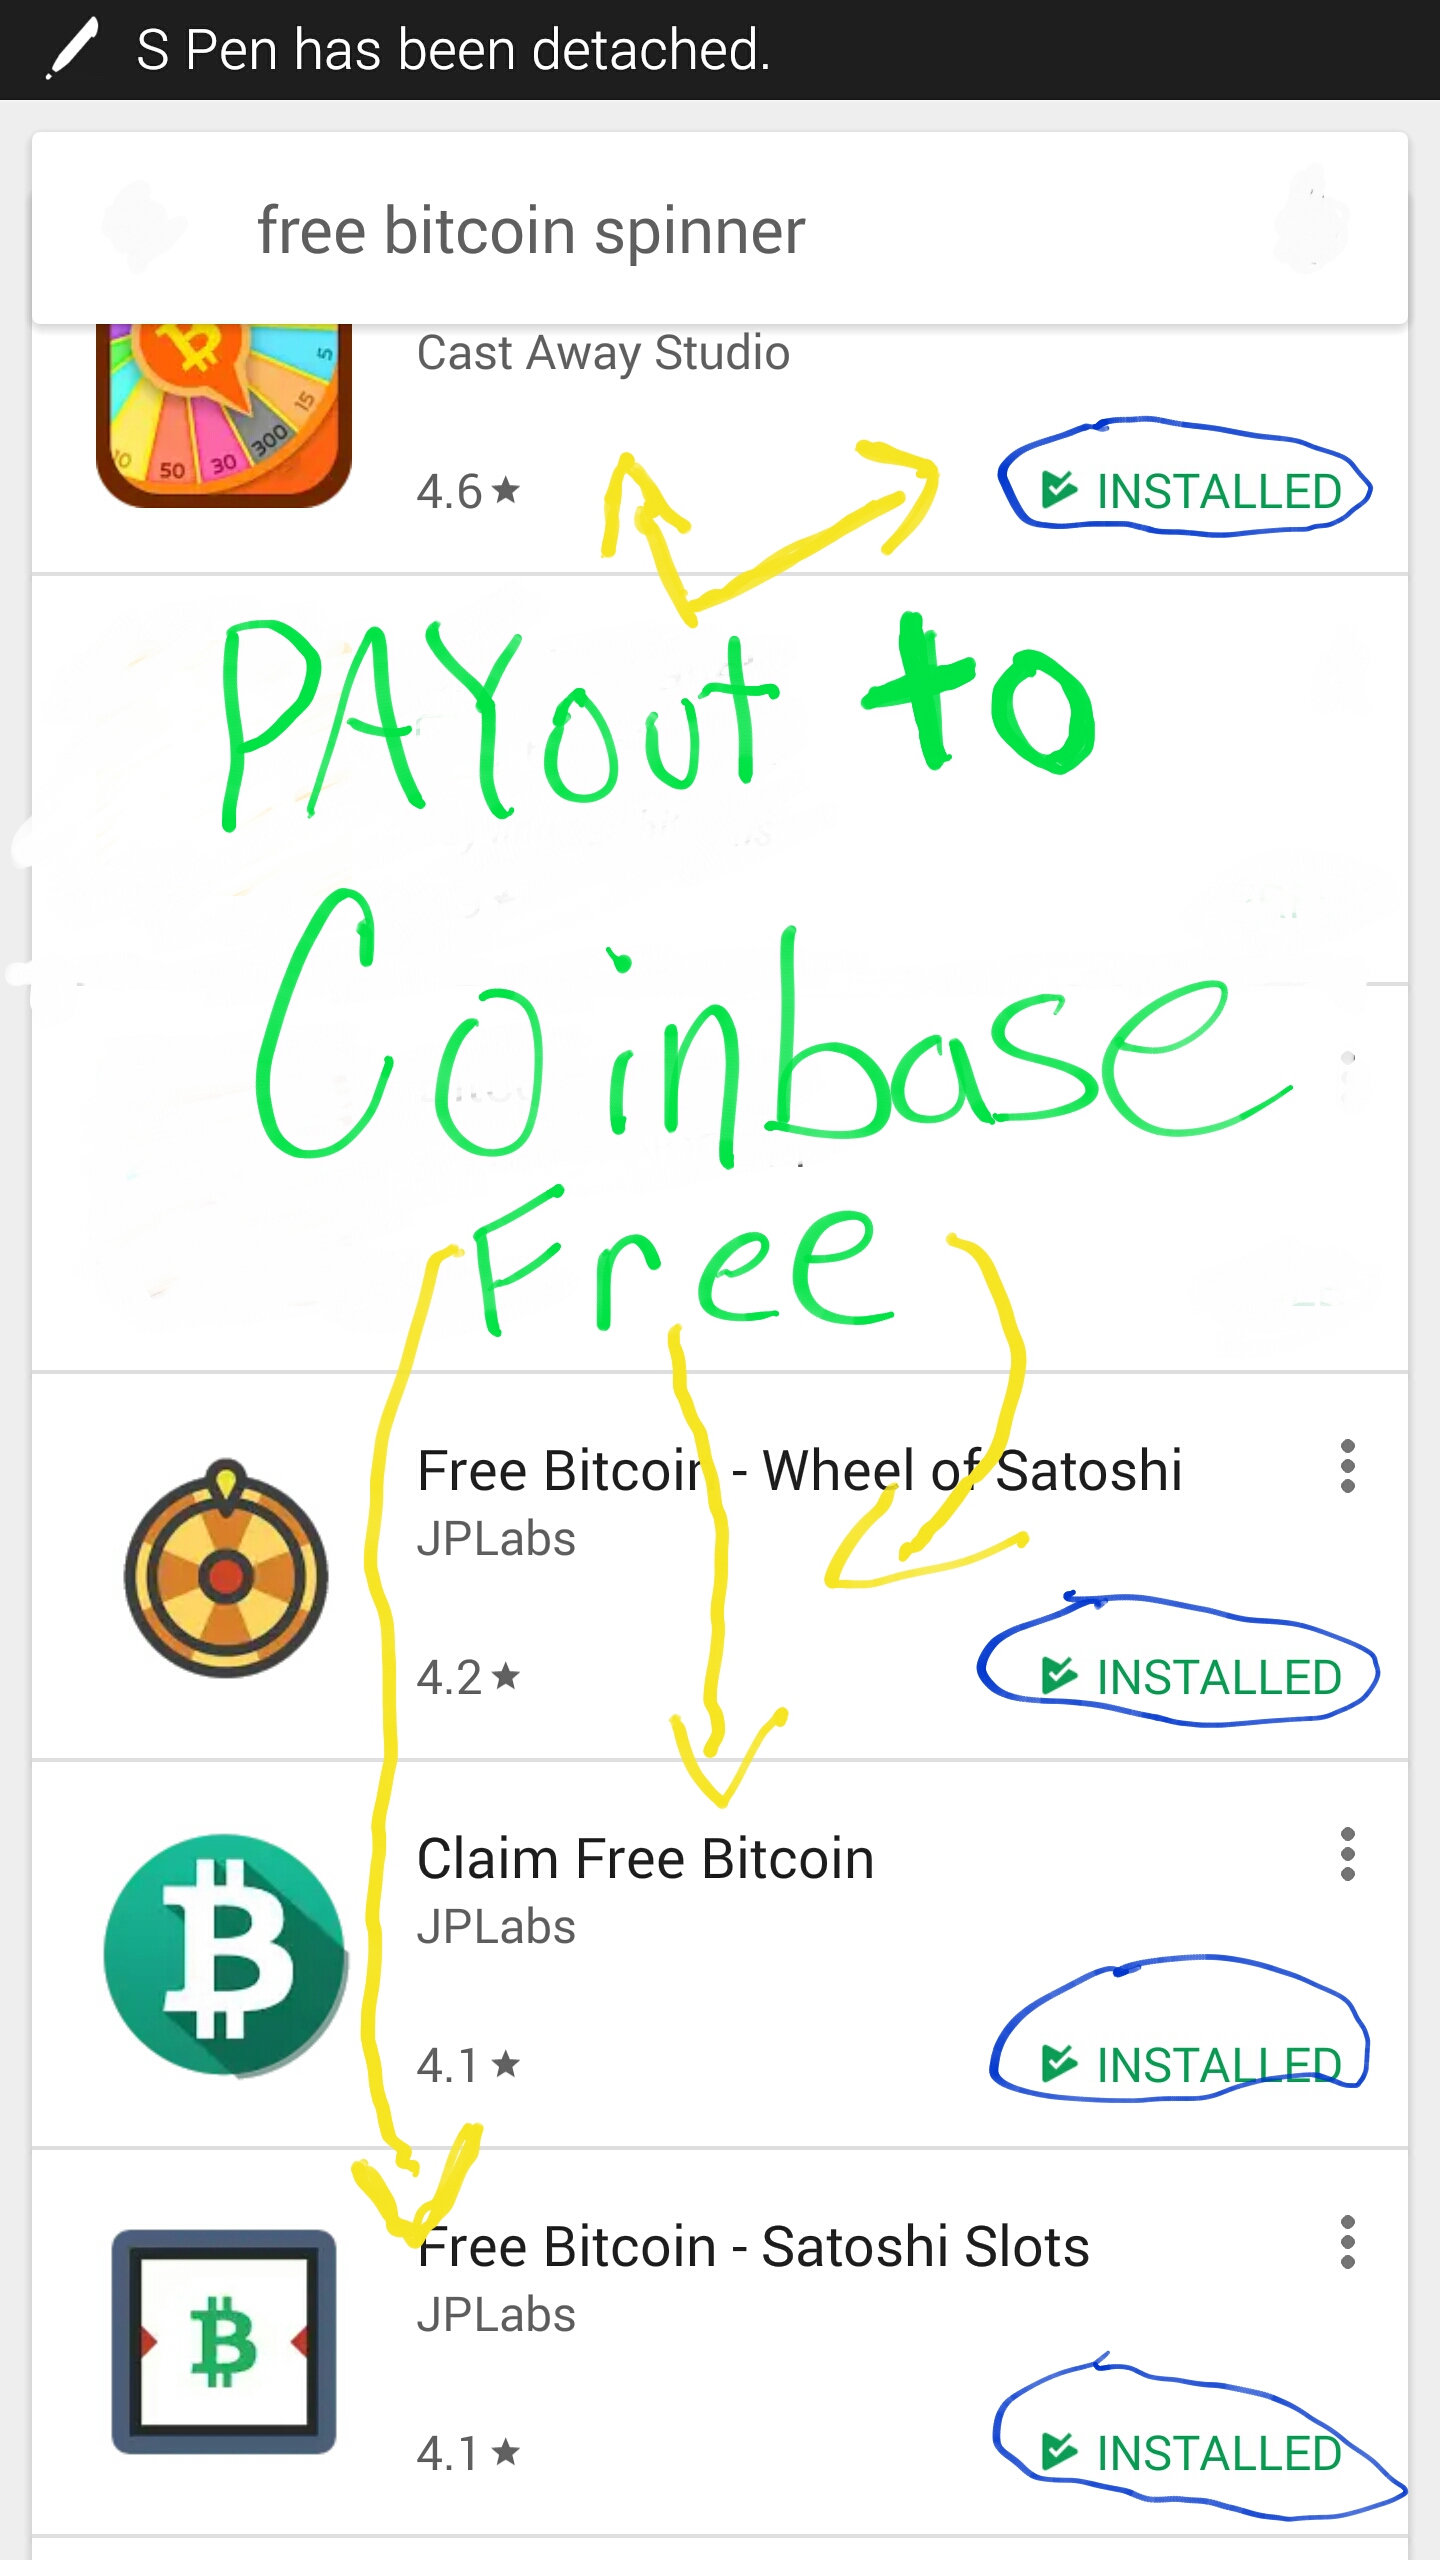 Free Bitcoin Straight To Your Coinbase Wallet Four Free Apps Steemit - 